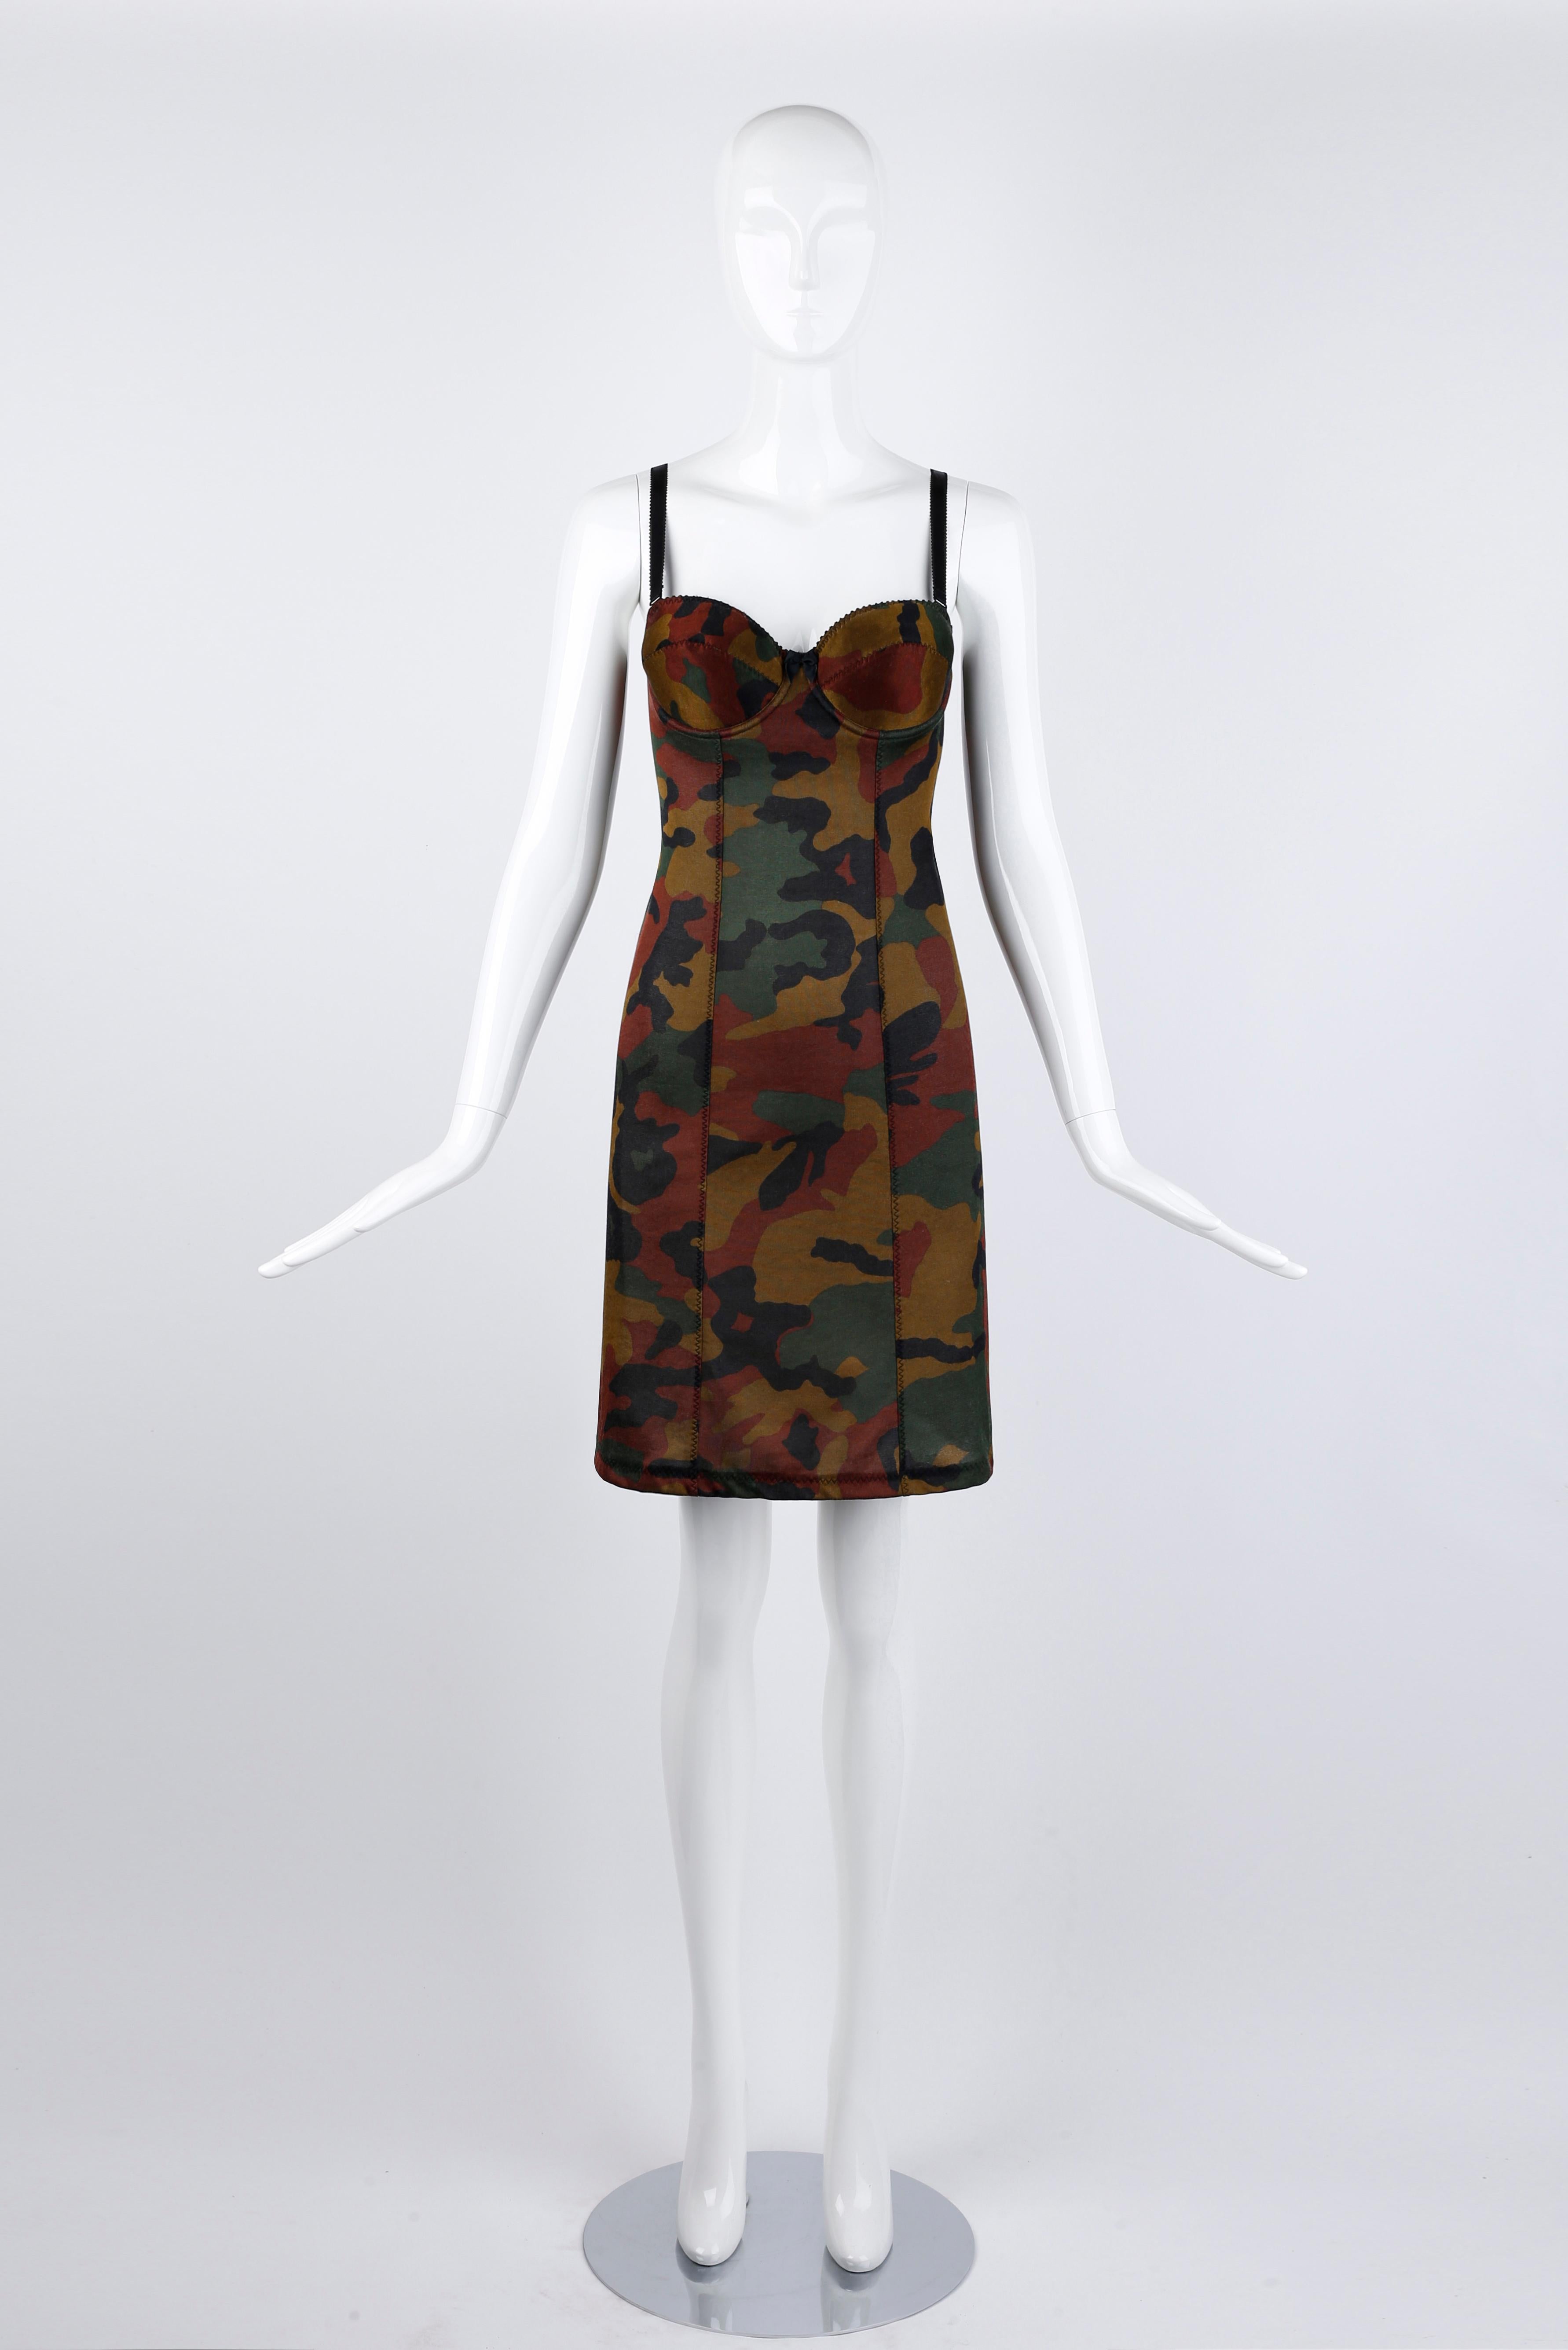 Designed by Jean Paul Gaultier Femme circa 1990's. Dress features a military-style color palette in camouflage print. A vintage camo print similar to the contemporary camo print seen in the spring/summer 2008 collection and again in the